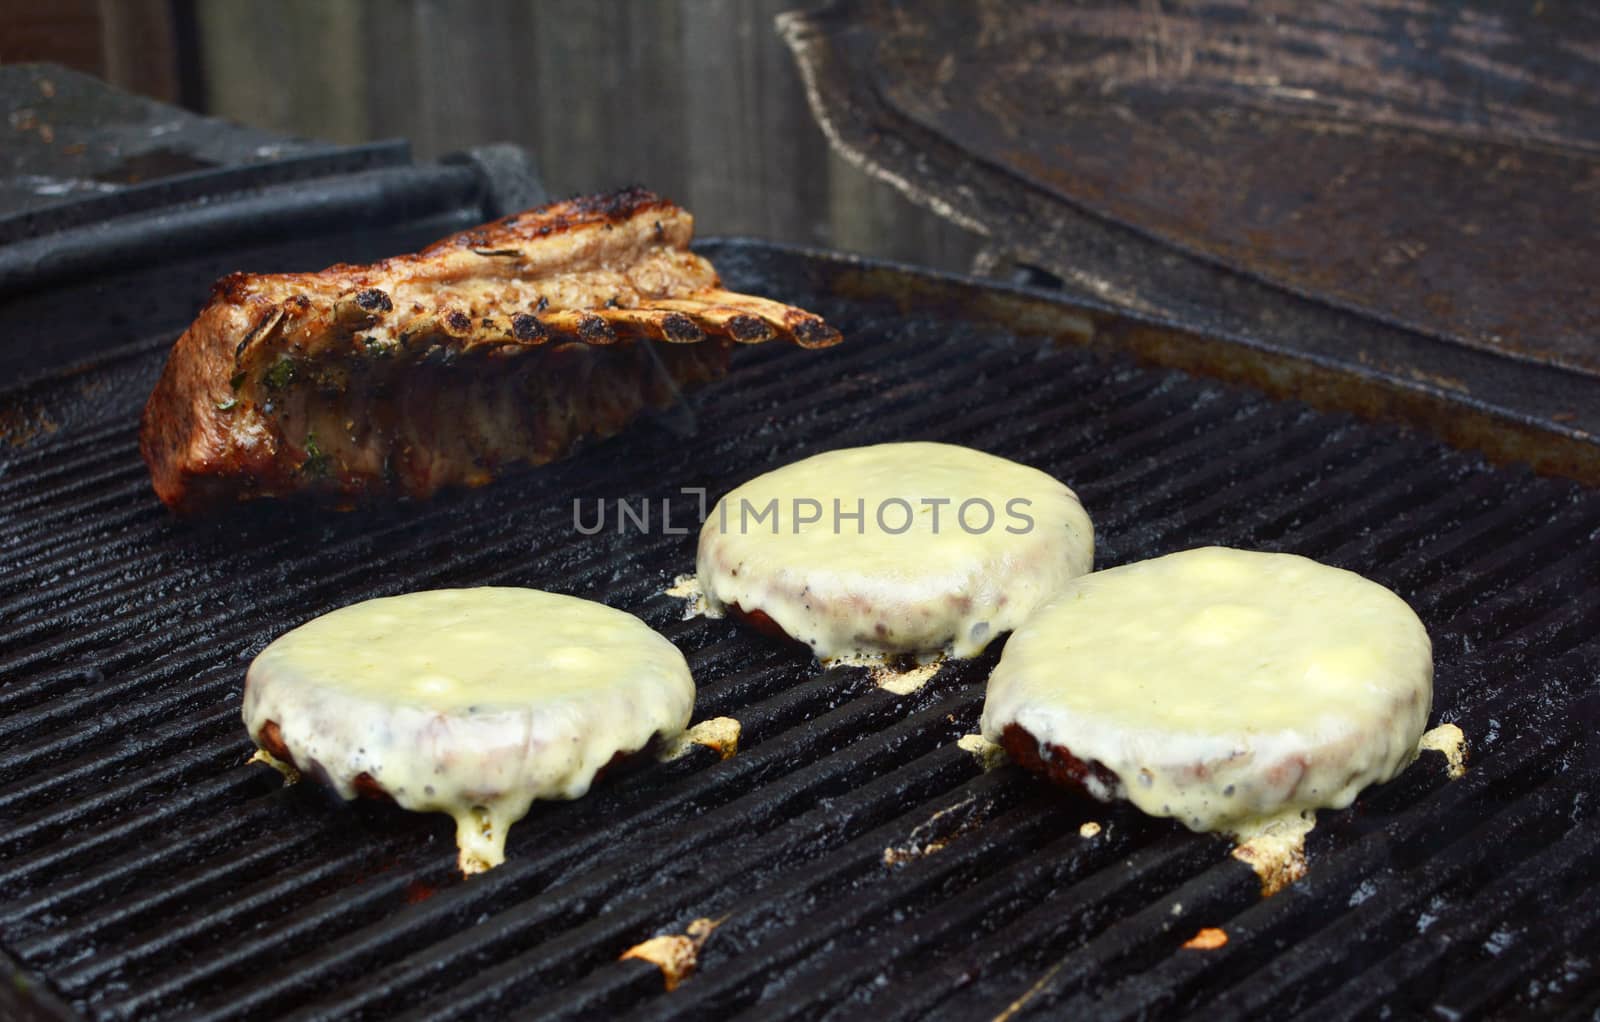 Three cheeseburgers and a rack of lamb finish cooking on a barbecue grill